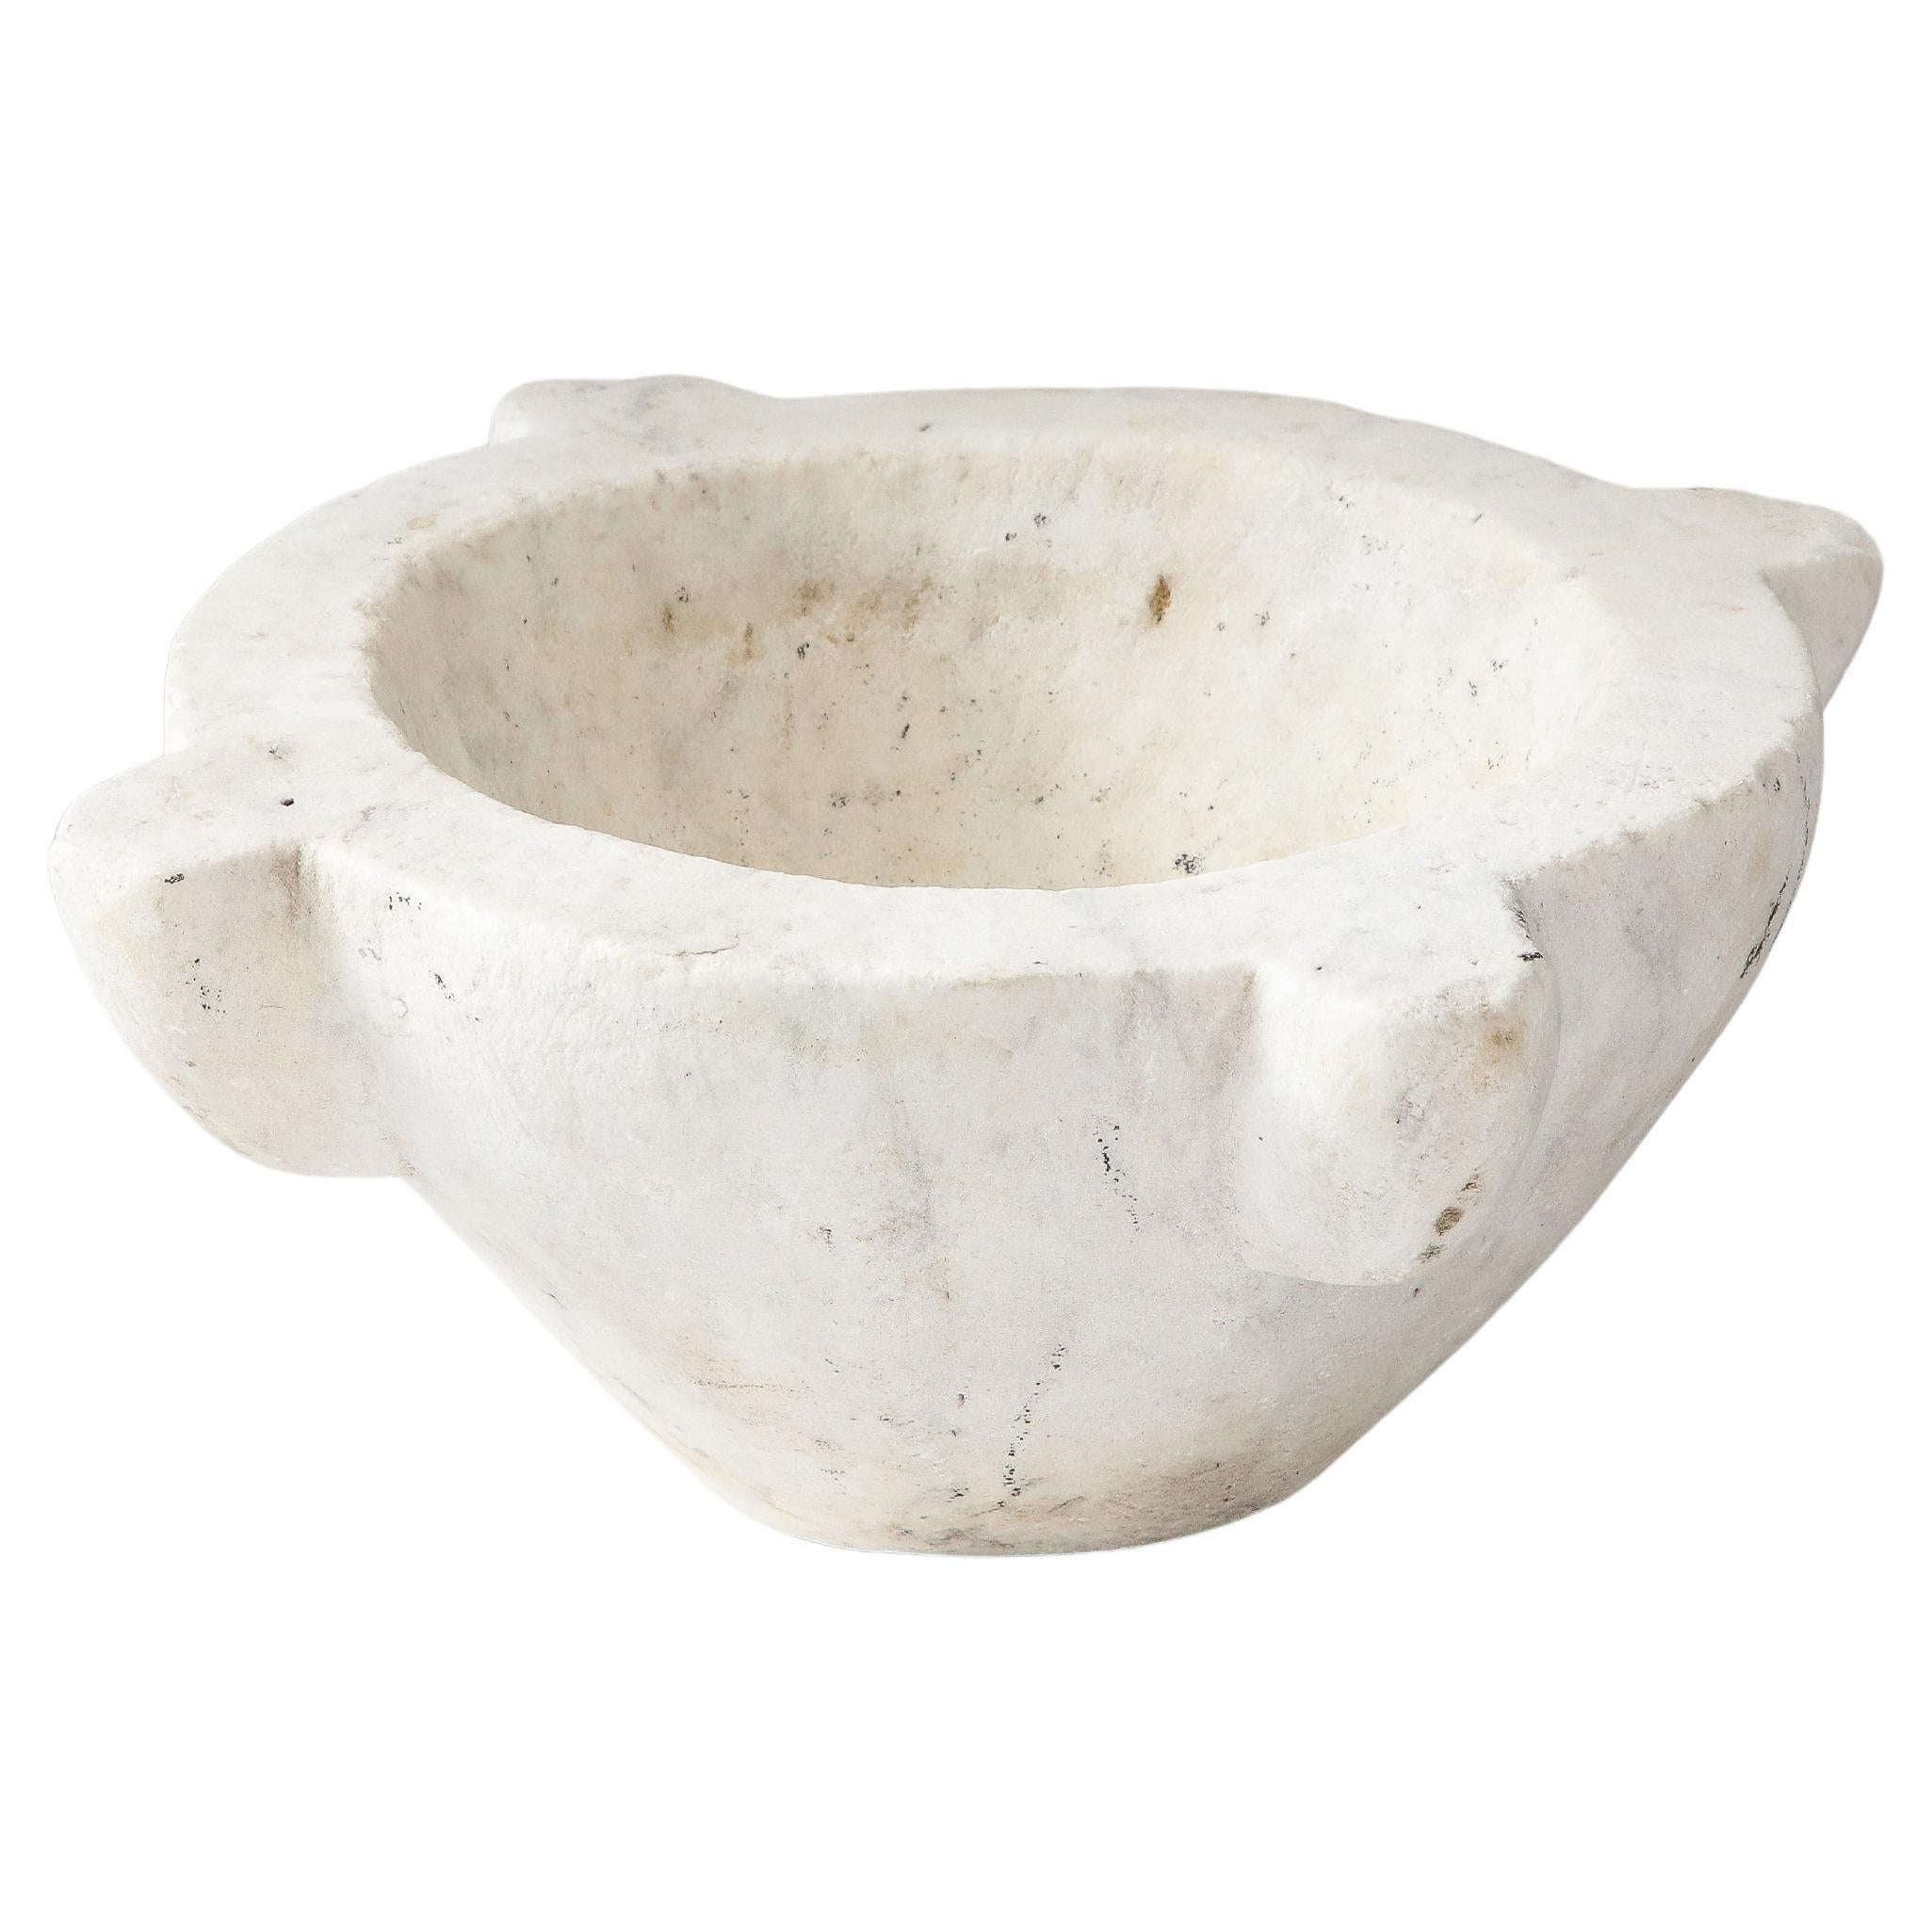 What is a marble mortar used for?